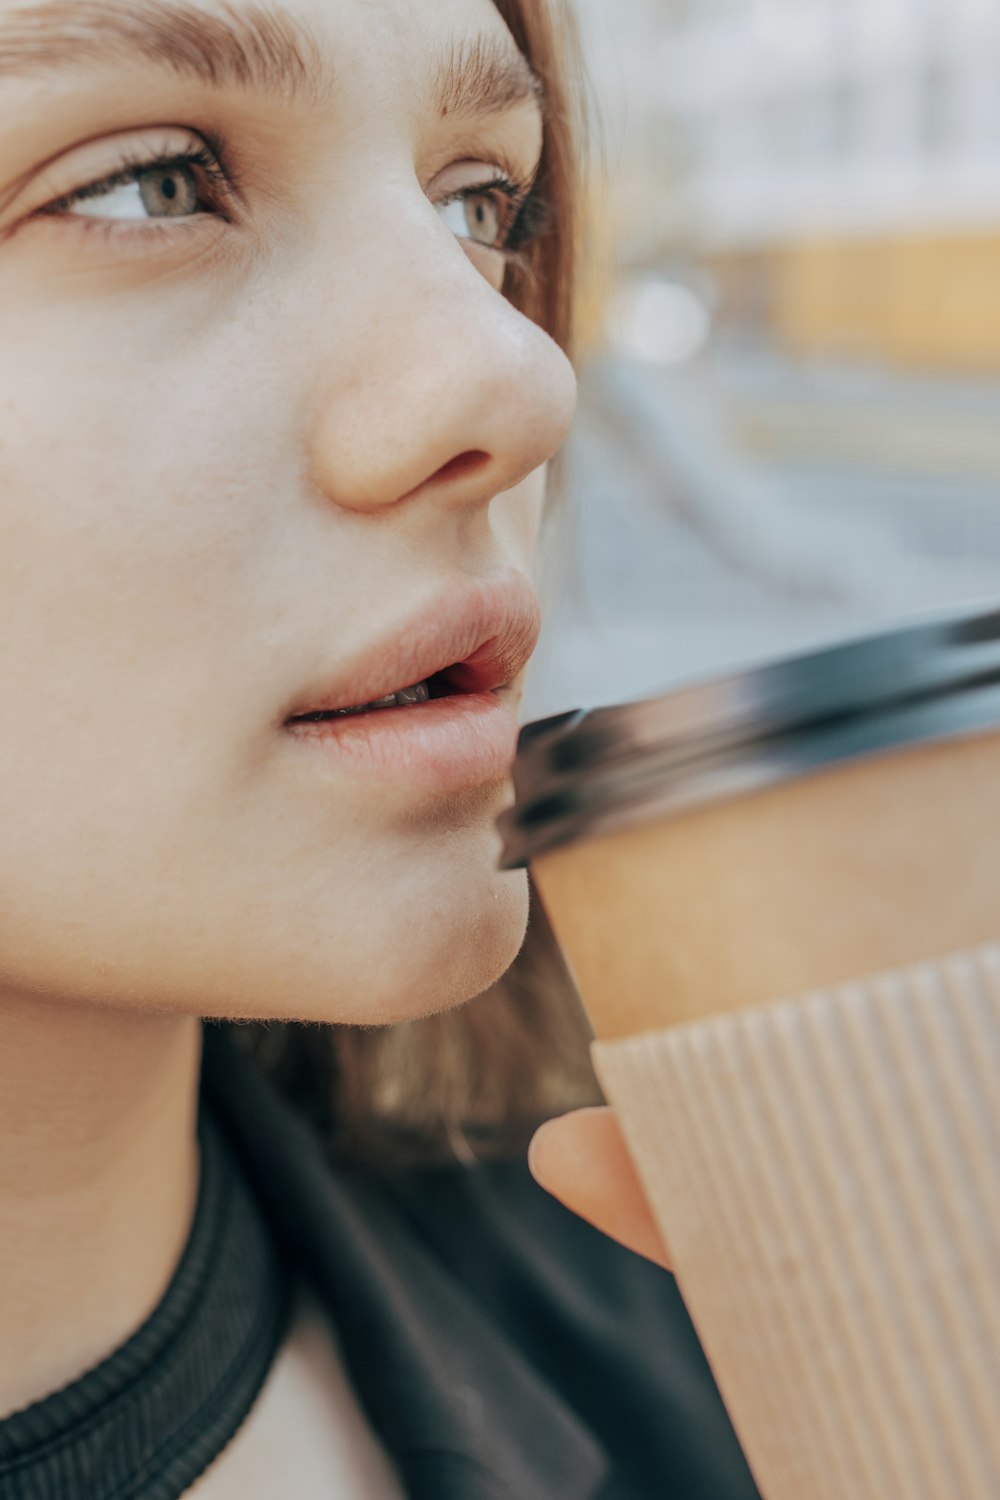 a close up of a person holding a cup of coffee